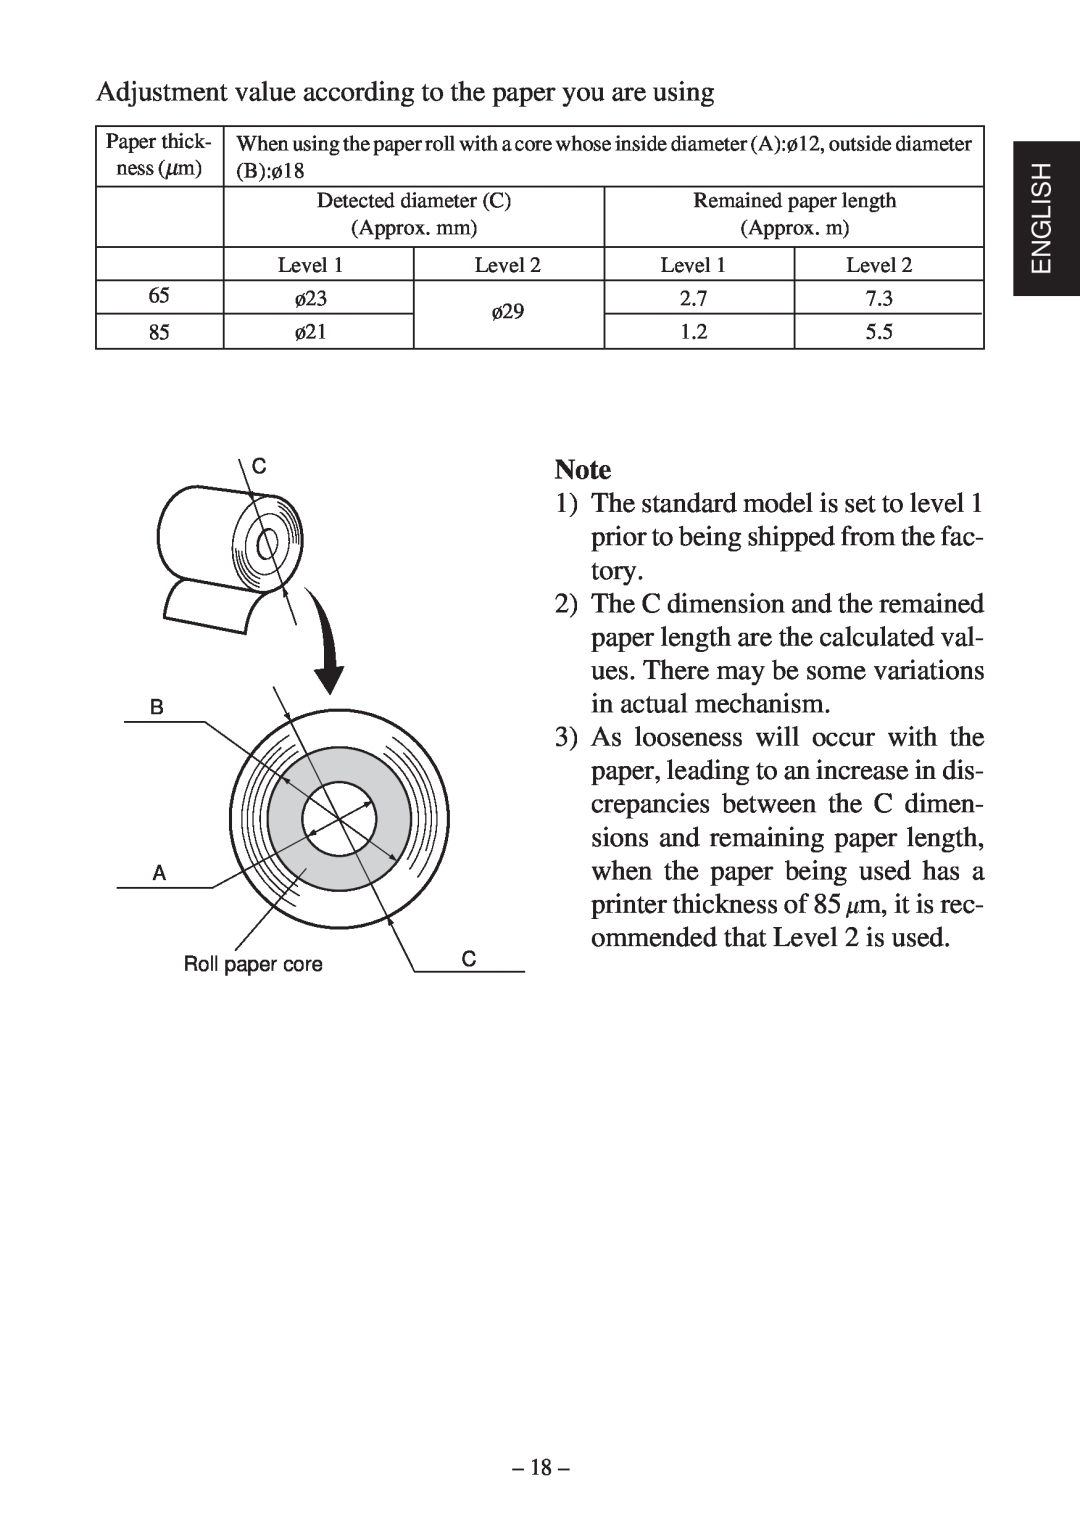 Star Micronics TSP600 user manual Adjustment value according to the paper you are using, C B A, Roll paper core 